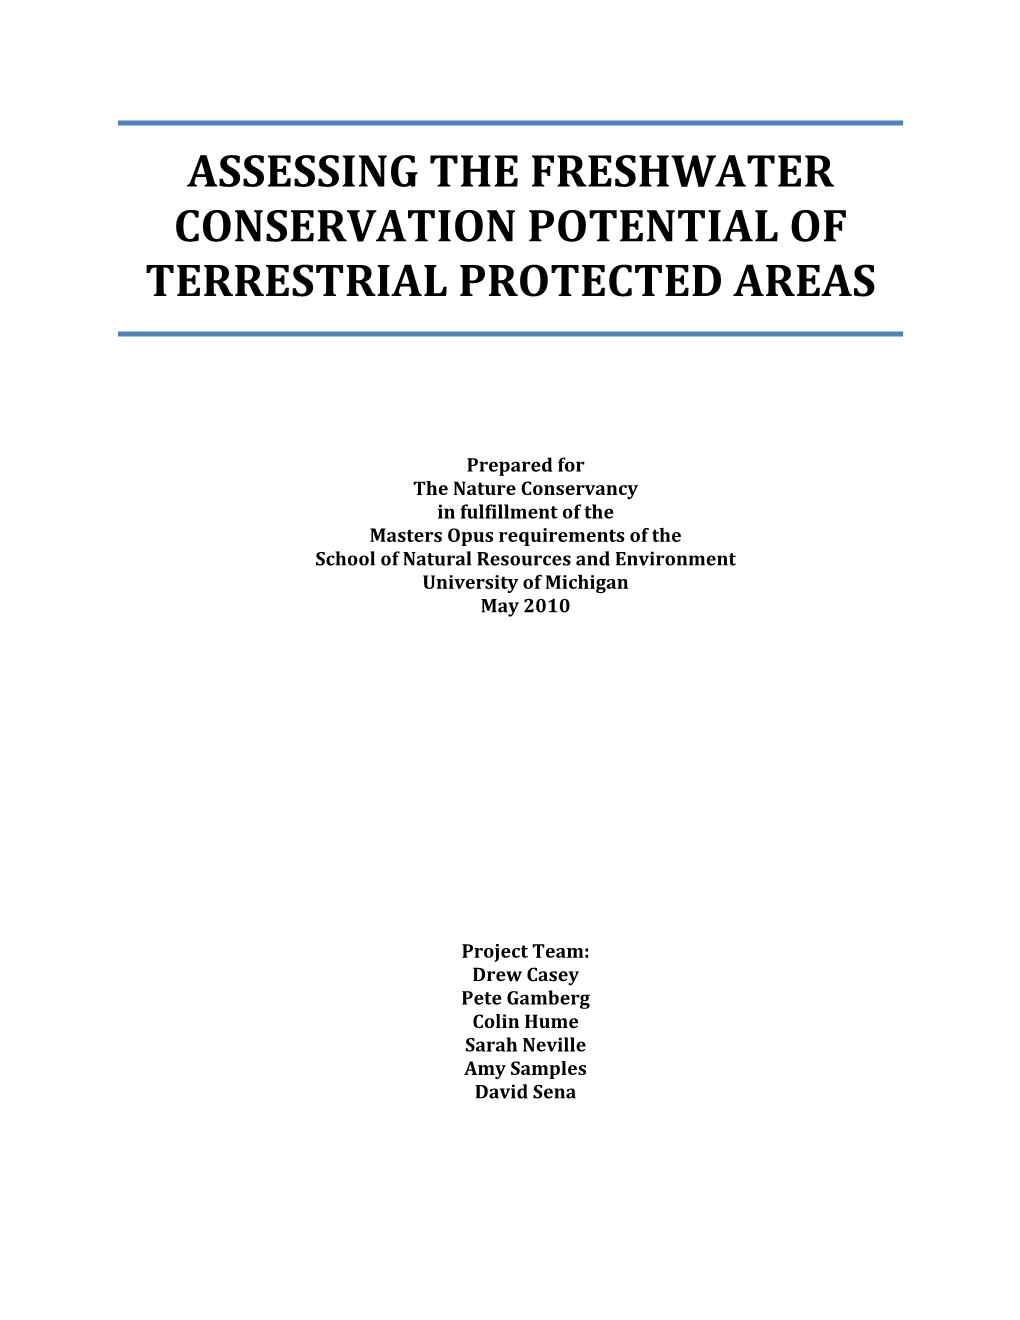 Assessing the Freshwater Conservation Potential of Terrestrial Protected Areas